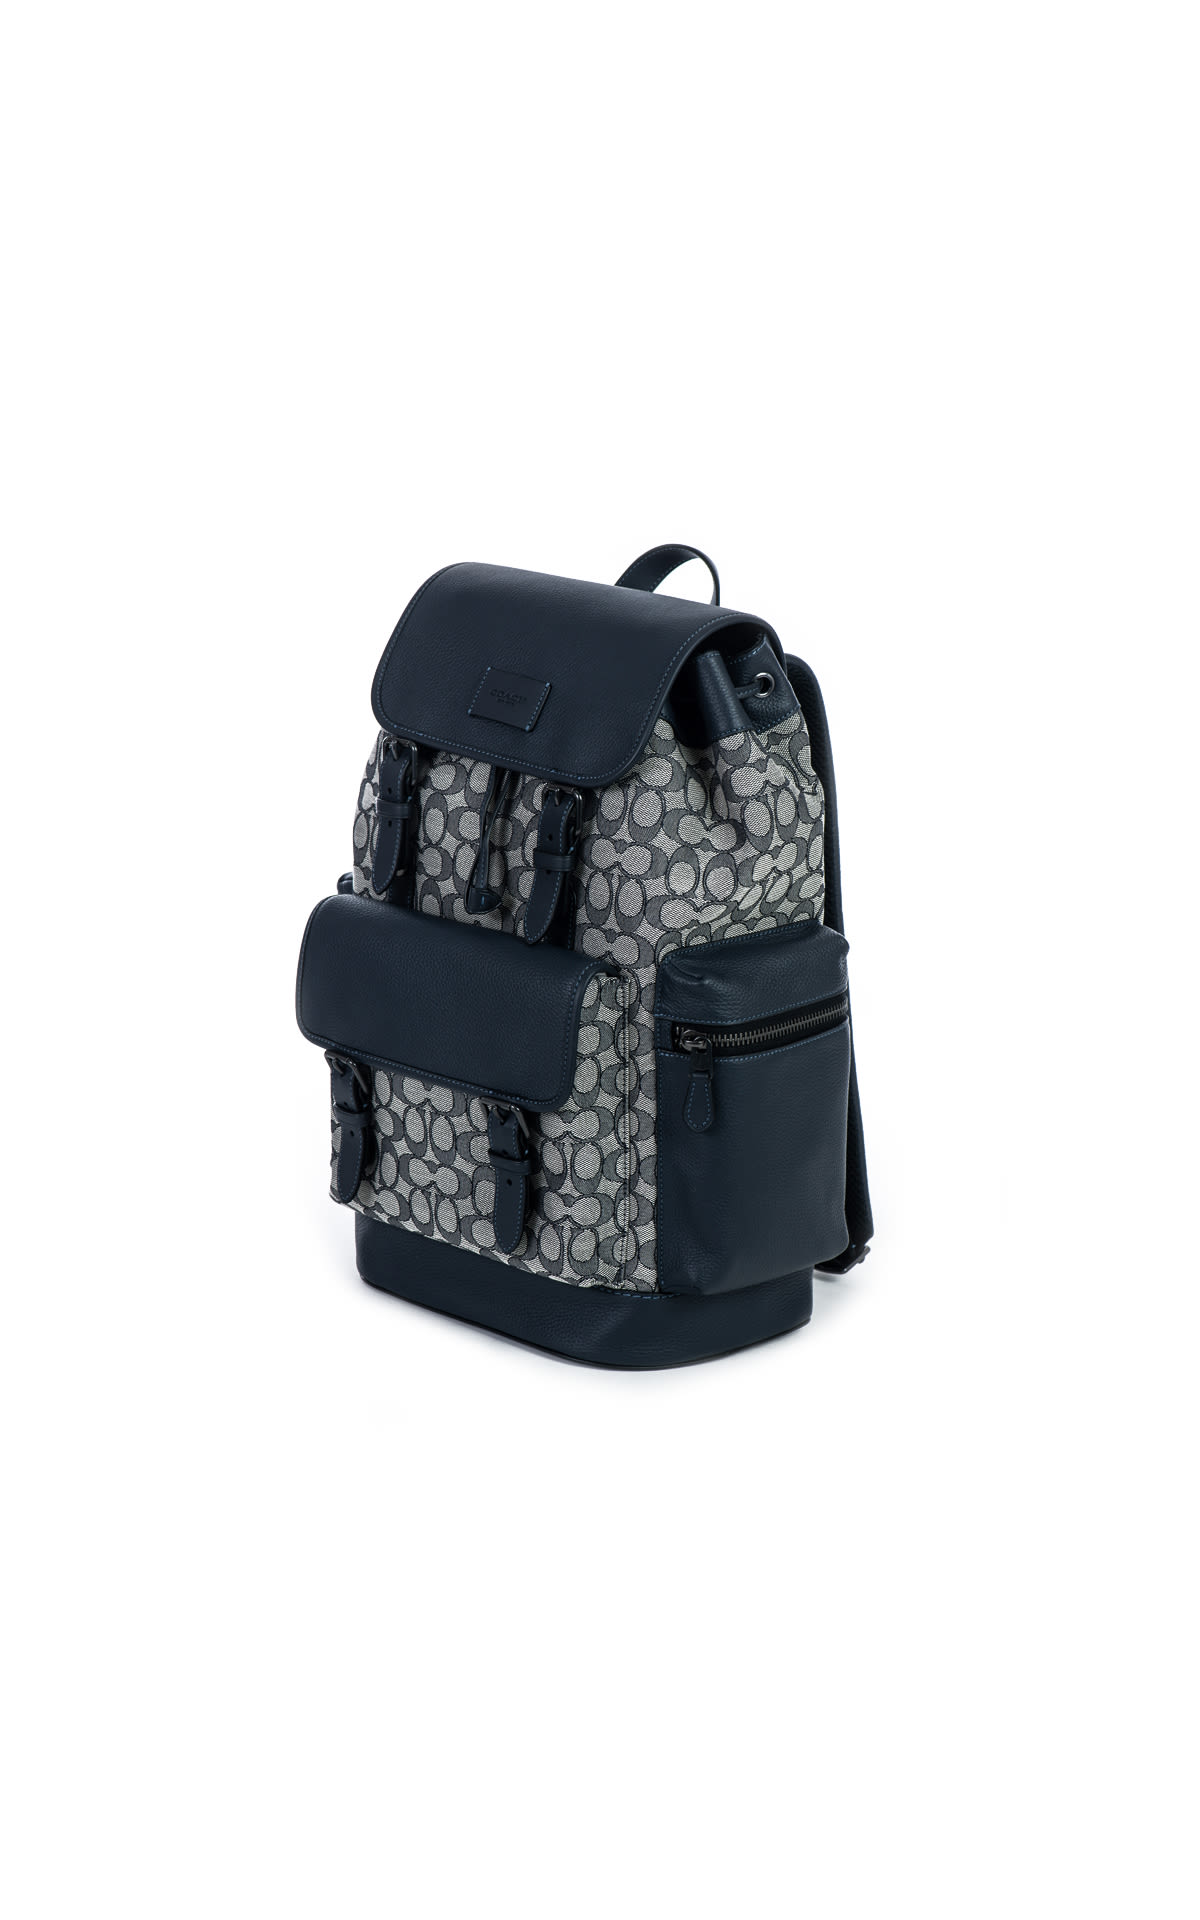 Eco-friendly leather and jacquard backpack Coach